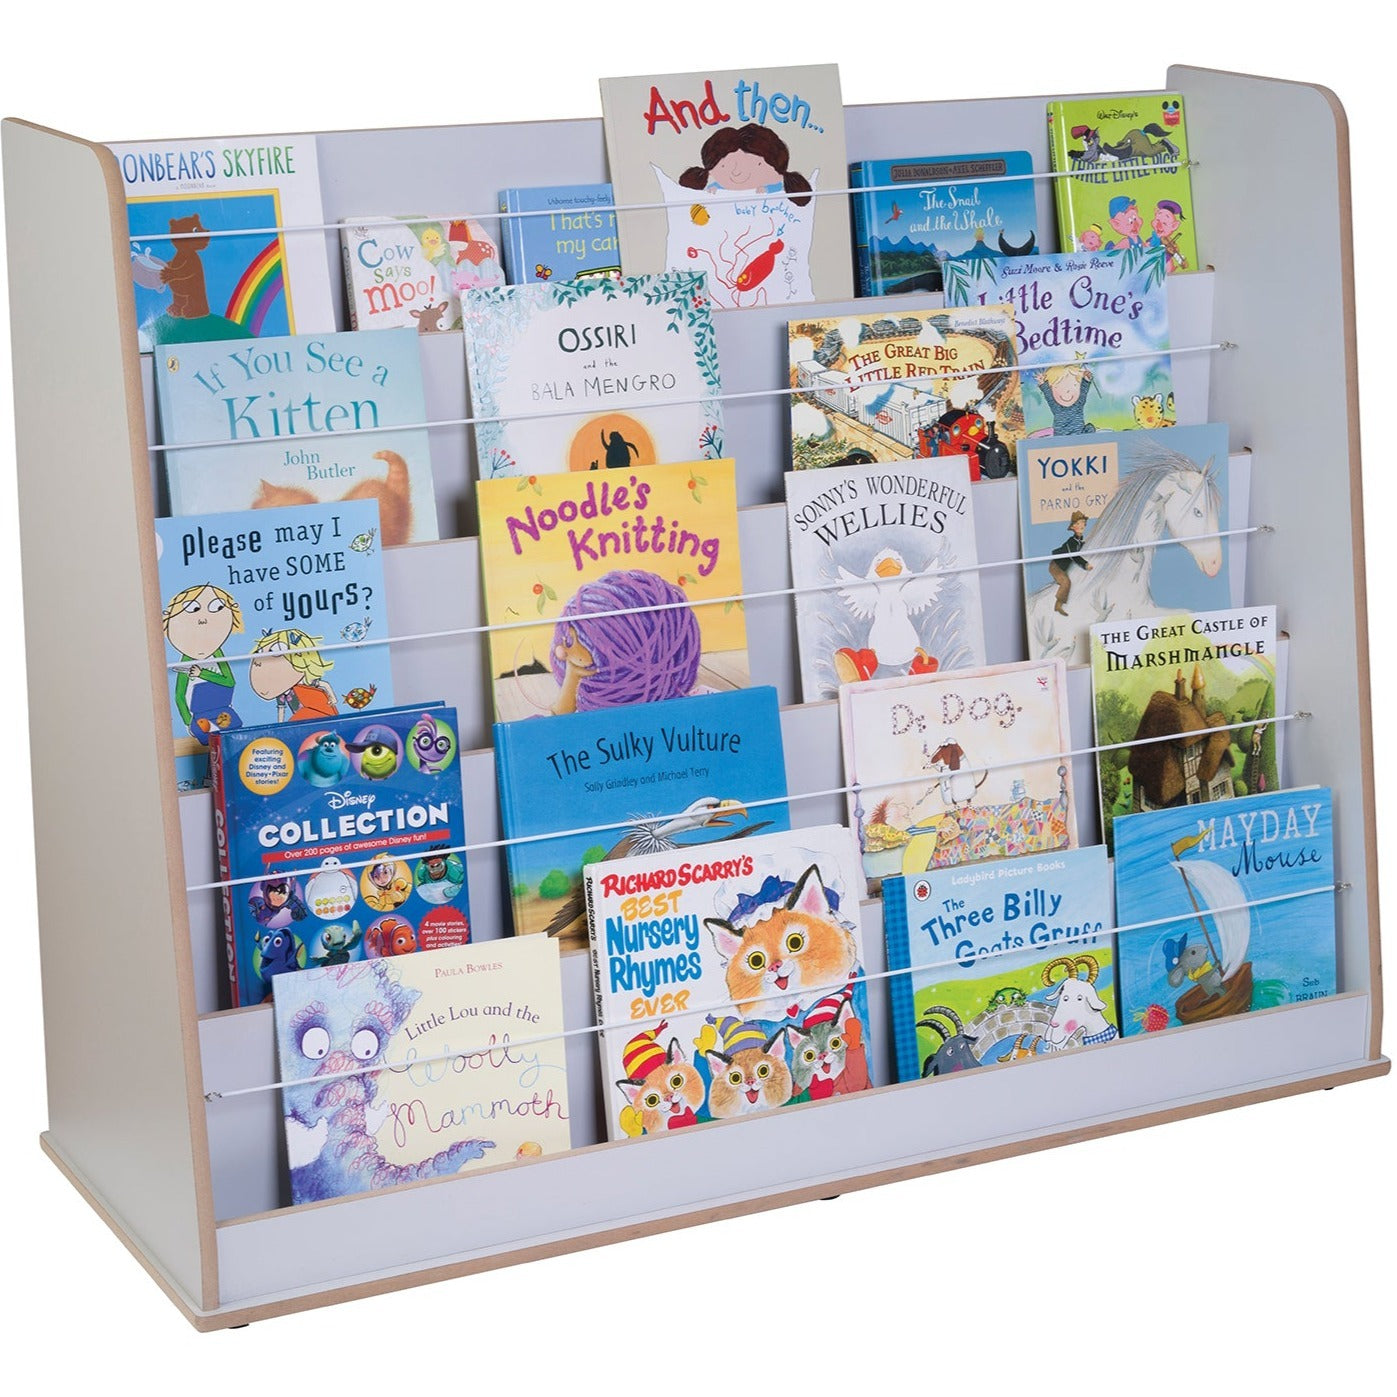 Wide Free Standing Book Display Unit, A wide anti-topple book display unit which is designed to be easily accessible and simple, yet sturdy. Great for maximising storage and displaying books the unit also features curtain wire on each shelf to keep books safe and in place. The unit can be used alone or alongside other units in the range. Wide Free Standing Book Display Unit 15mm Covered MDF – ISO 22196 certified antibacterial. Can be used alone or alongside other units in the free-standing range. Easily acc